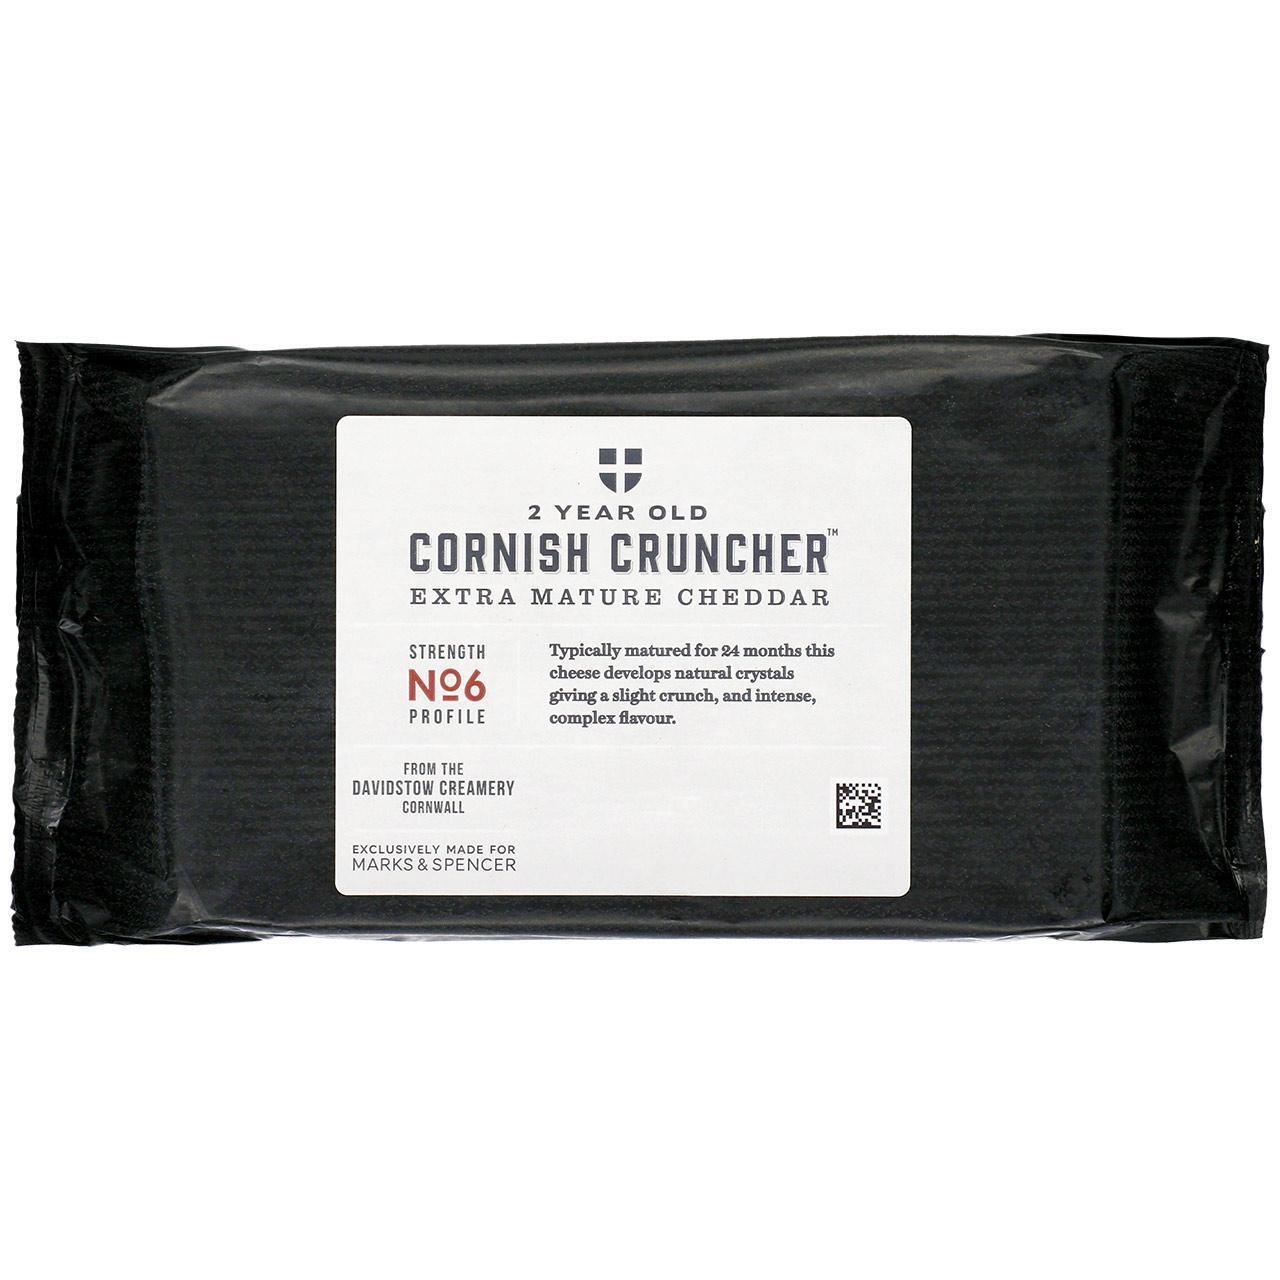 M&S Cornish Cruncher Extra Mature Cheddar Cheese 500g